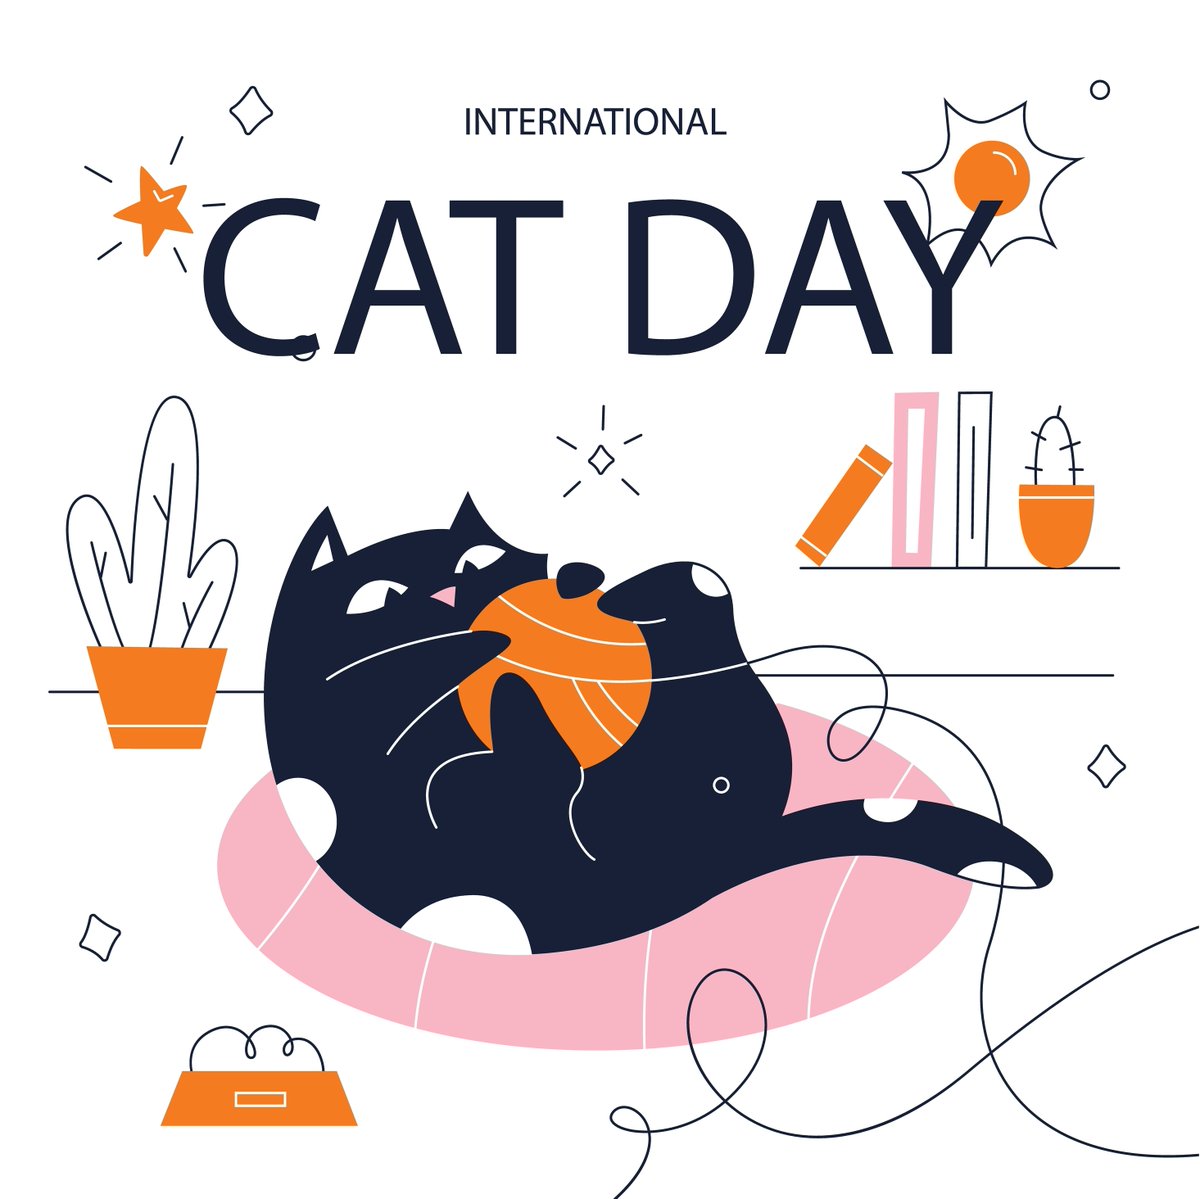 Tomorrow is International Cat Day! 
We want you to be able to live happily with your kitty, and we want to help you make your apartment just right for them to live comfortably!
Read our latest blog and find out how you can make your apartment cat-friendly!
https://t.co/HJp0tYFoZB https://t.co/NehDHnEtxJ